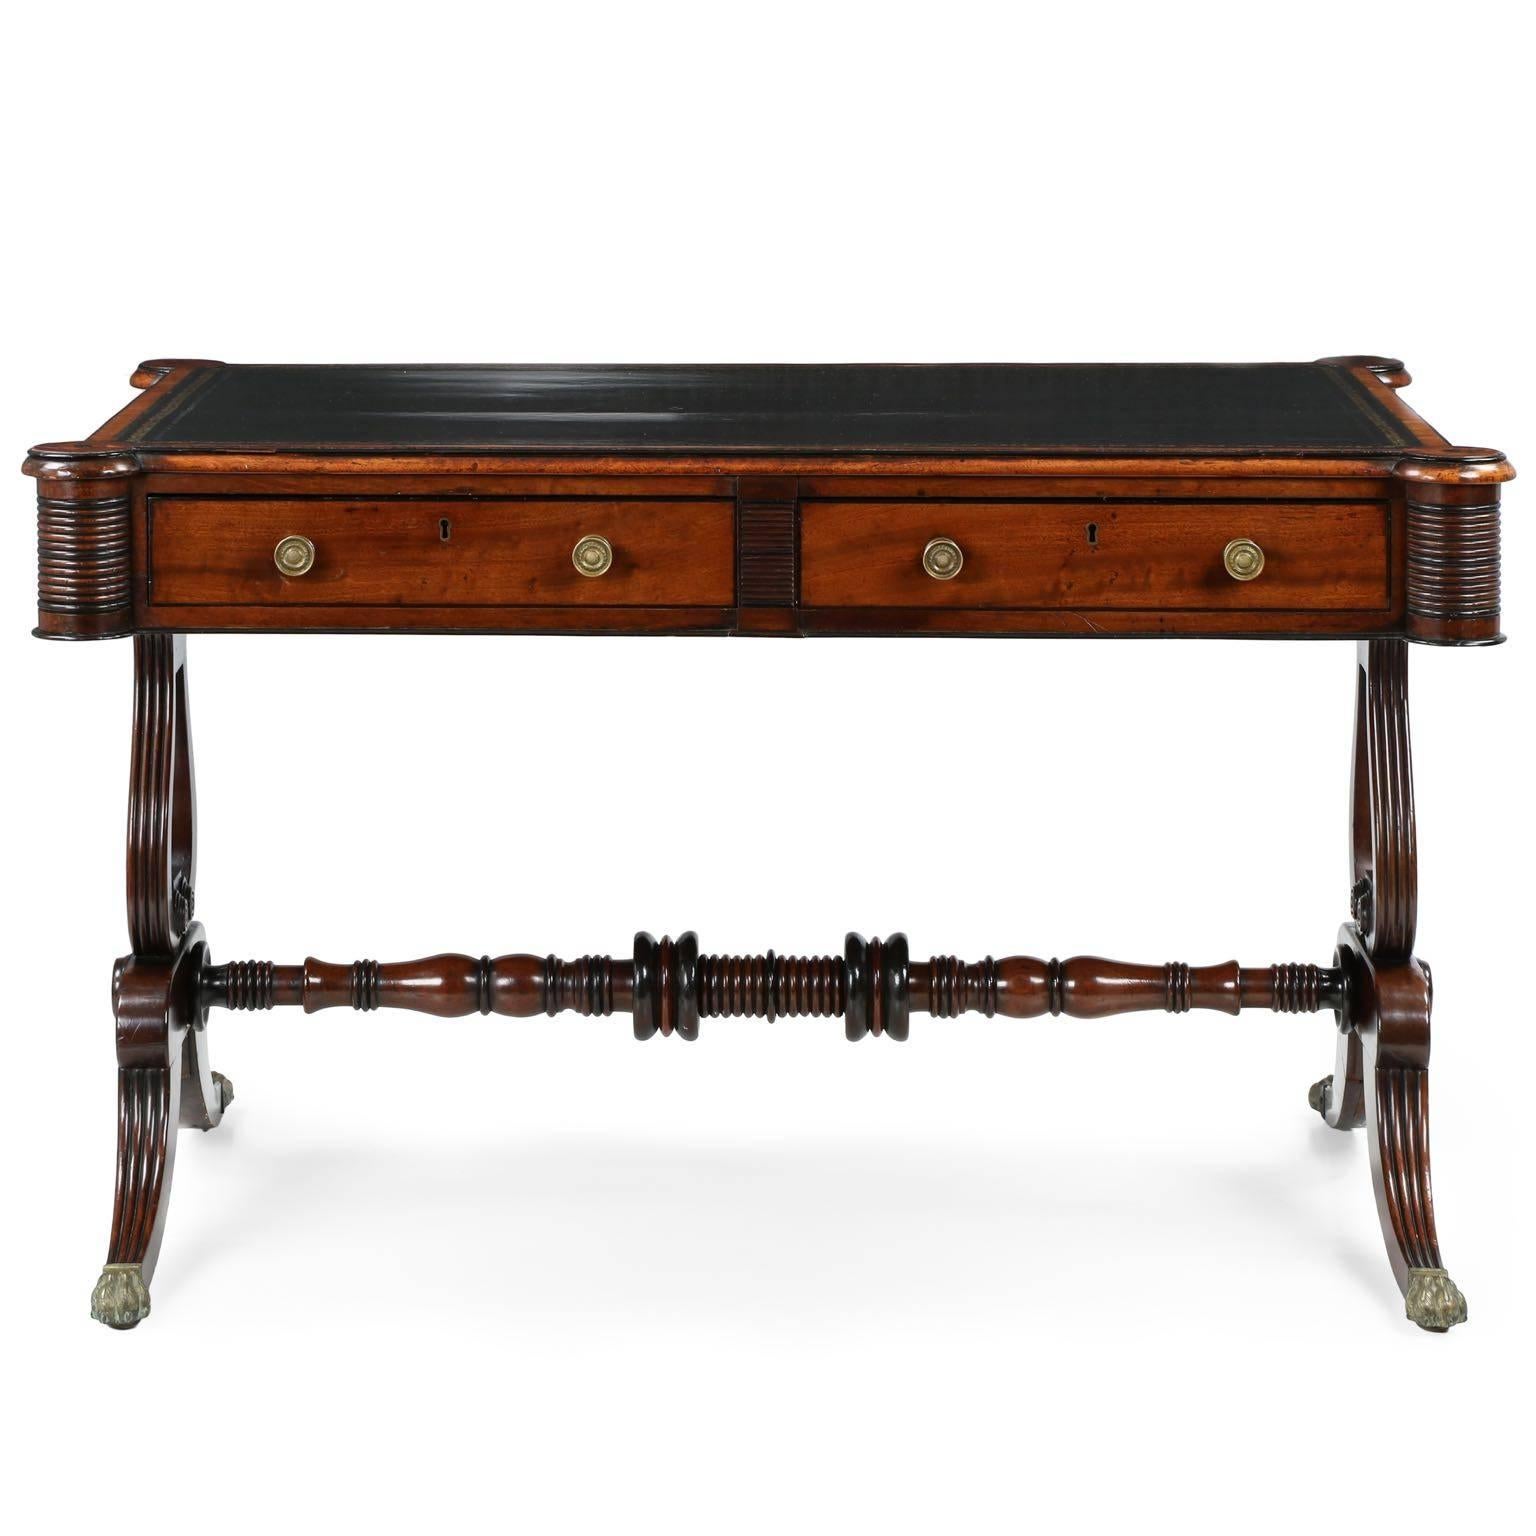 A remarkably striking piece, this fine English William IV writing desk has survived in simply stunning condition.  Entirely original with only the most minor of restorations to surfaces and structure, this particularly noteworthy in light of the